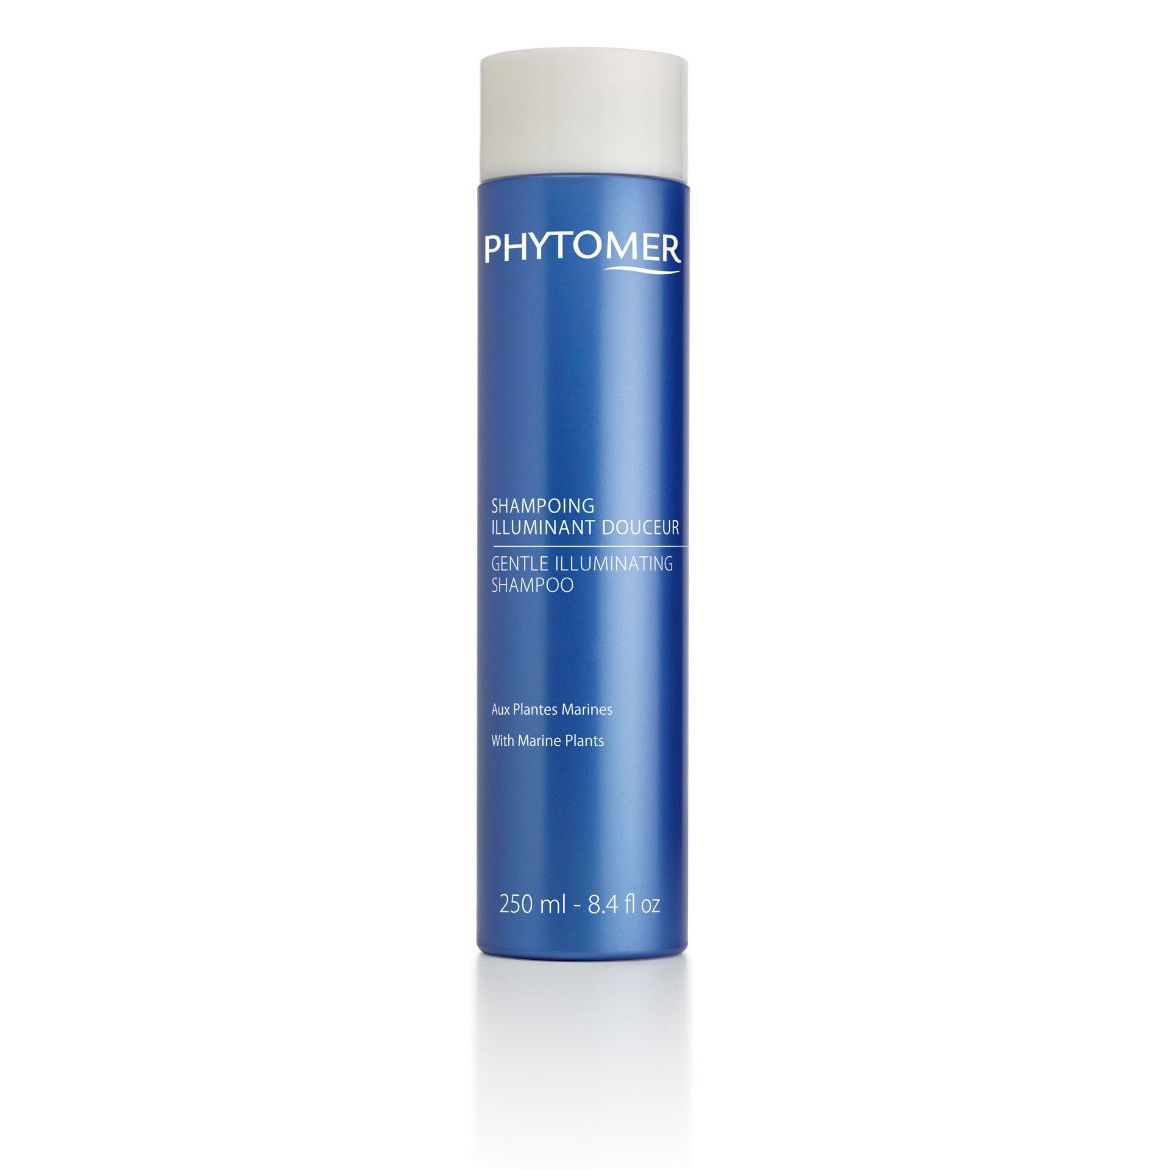 Immagine di Phytomer Shampoing Illuminant Douceur - aux Plantes Marines (250ml)